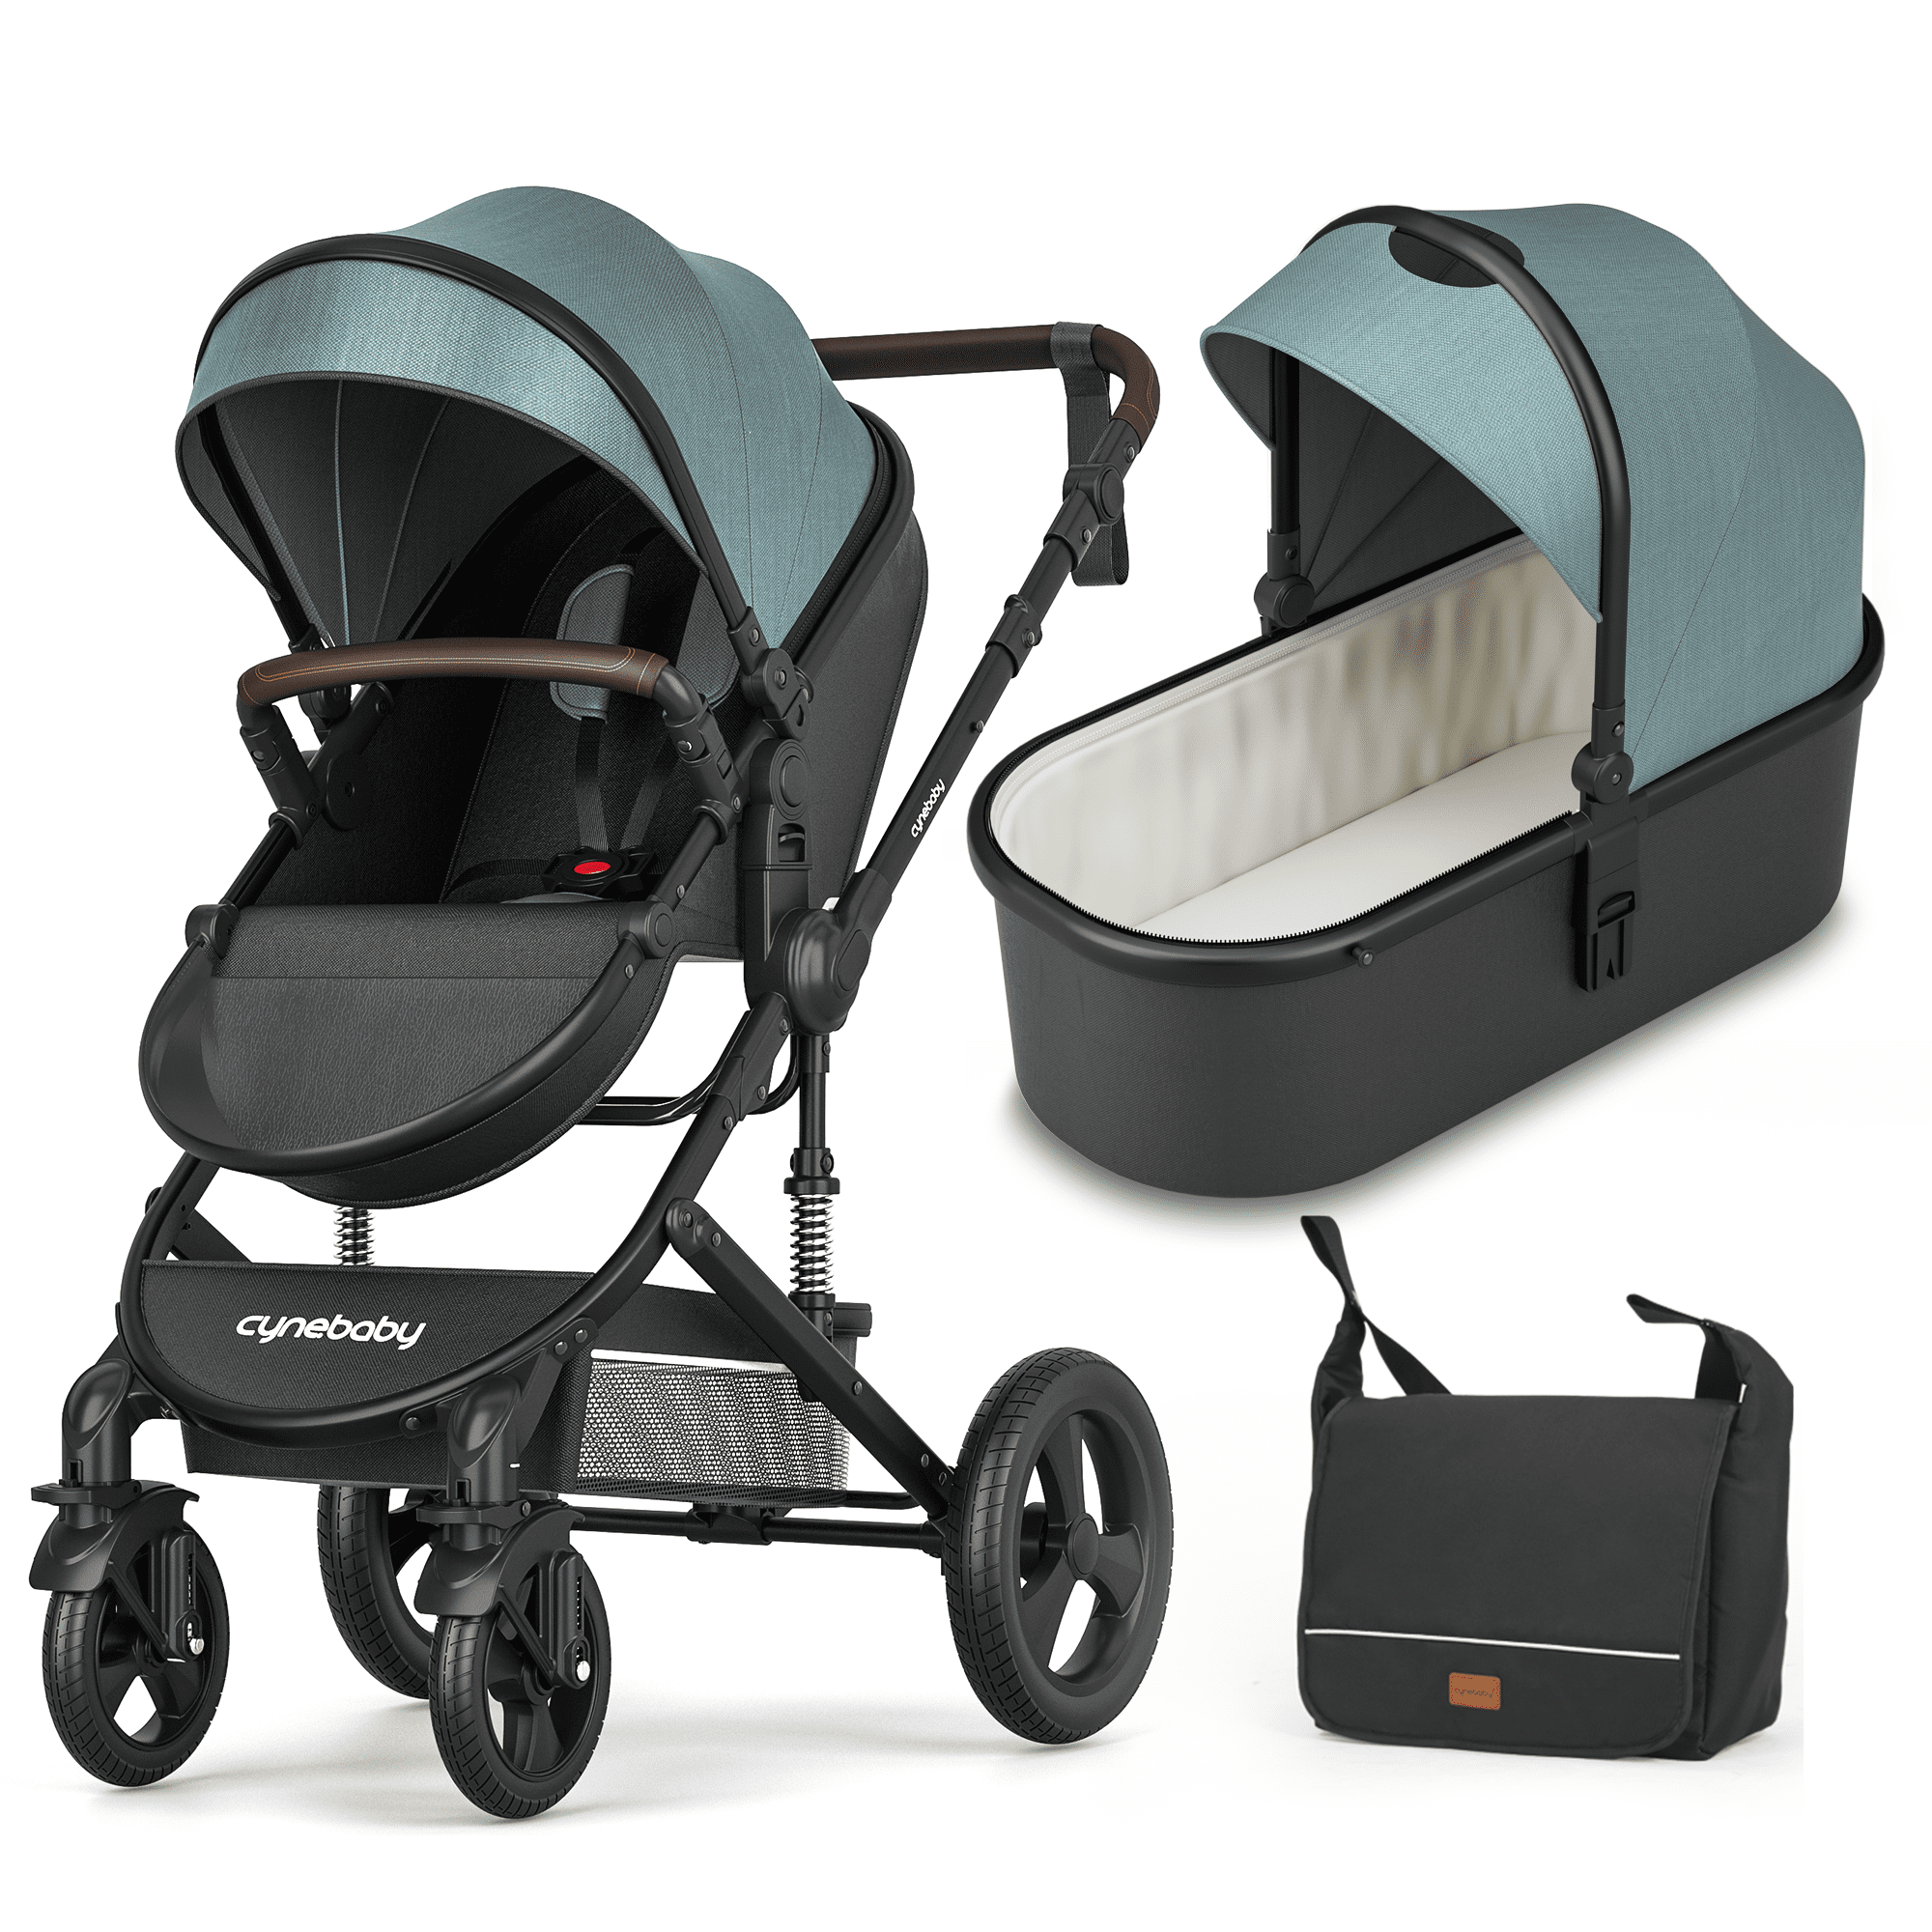 Travel Systems With Rain Cover Easy To Assemble Baby Stroller Foldable Travel System High Landscape View Pram Pushchair,3-in-1 Convertible Bassinet Sleeping Strollers,Portable Shock Absorption Strolle 